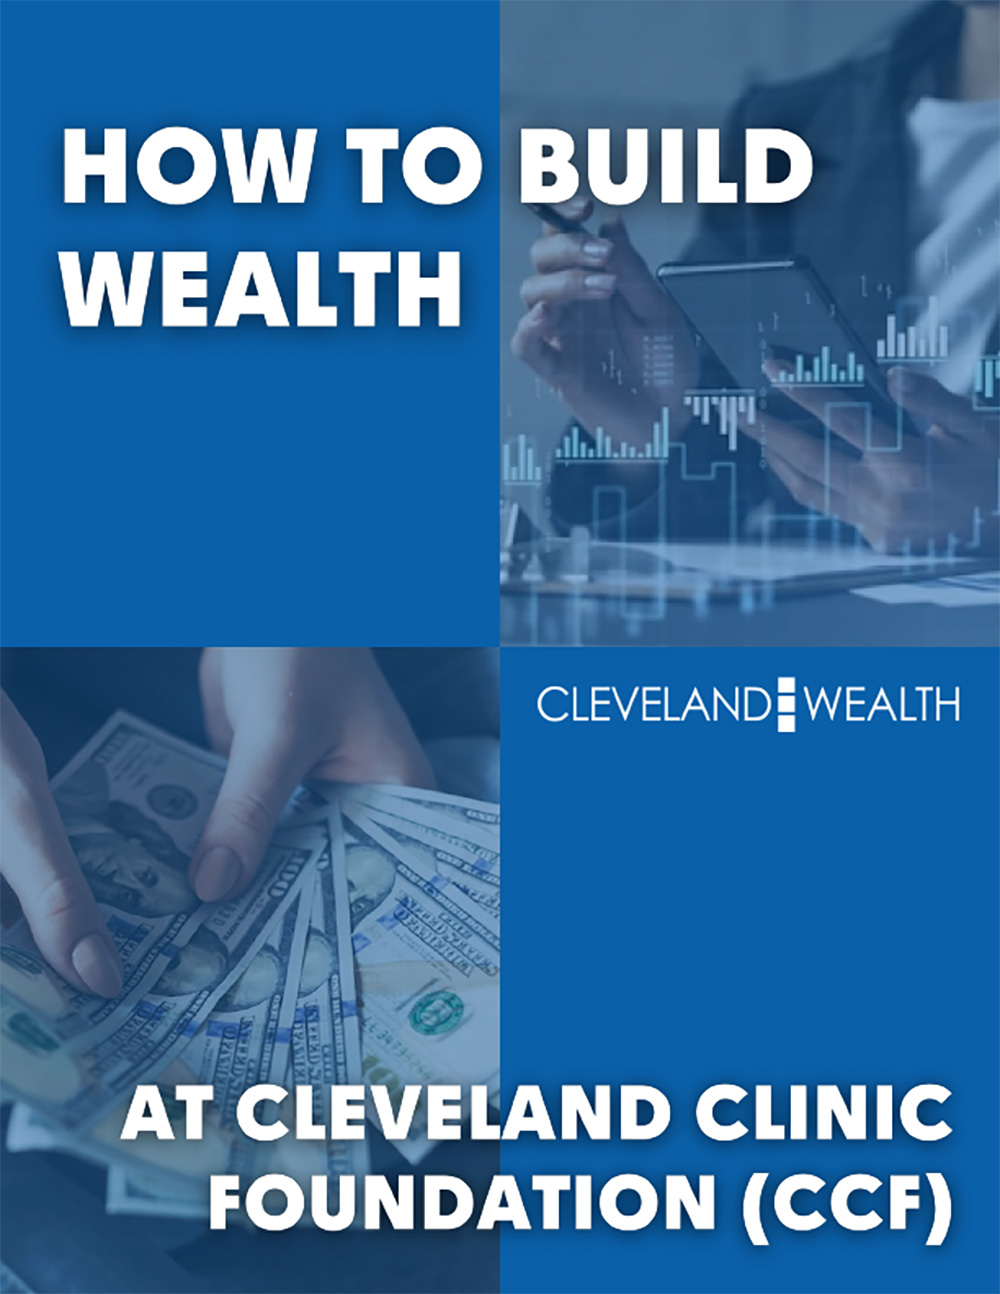 How to Build Wealth at Cleveland Clinic Foundation | A Cleveland Wealth Whitepaper